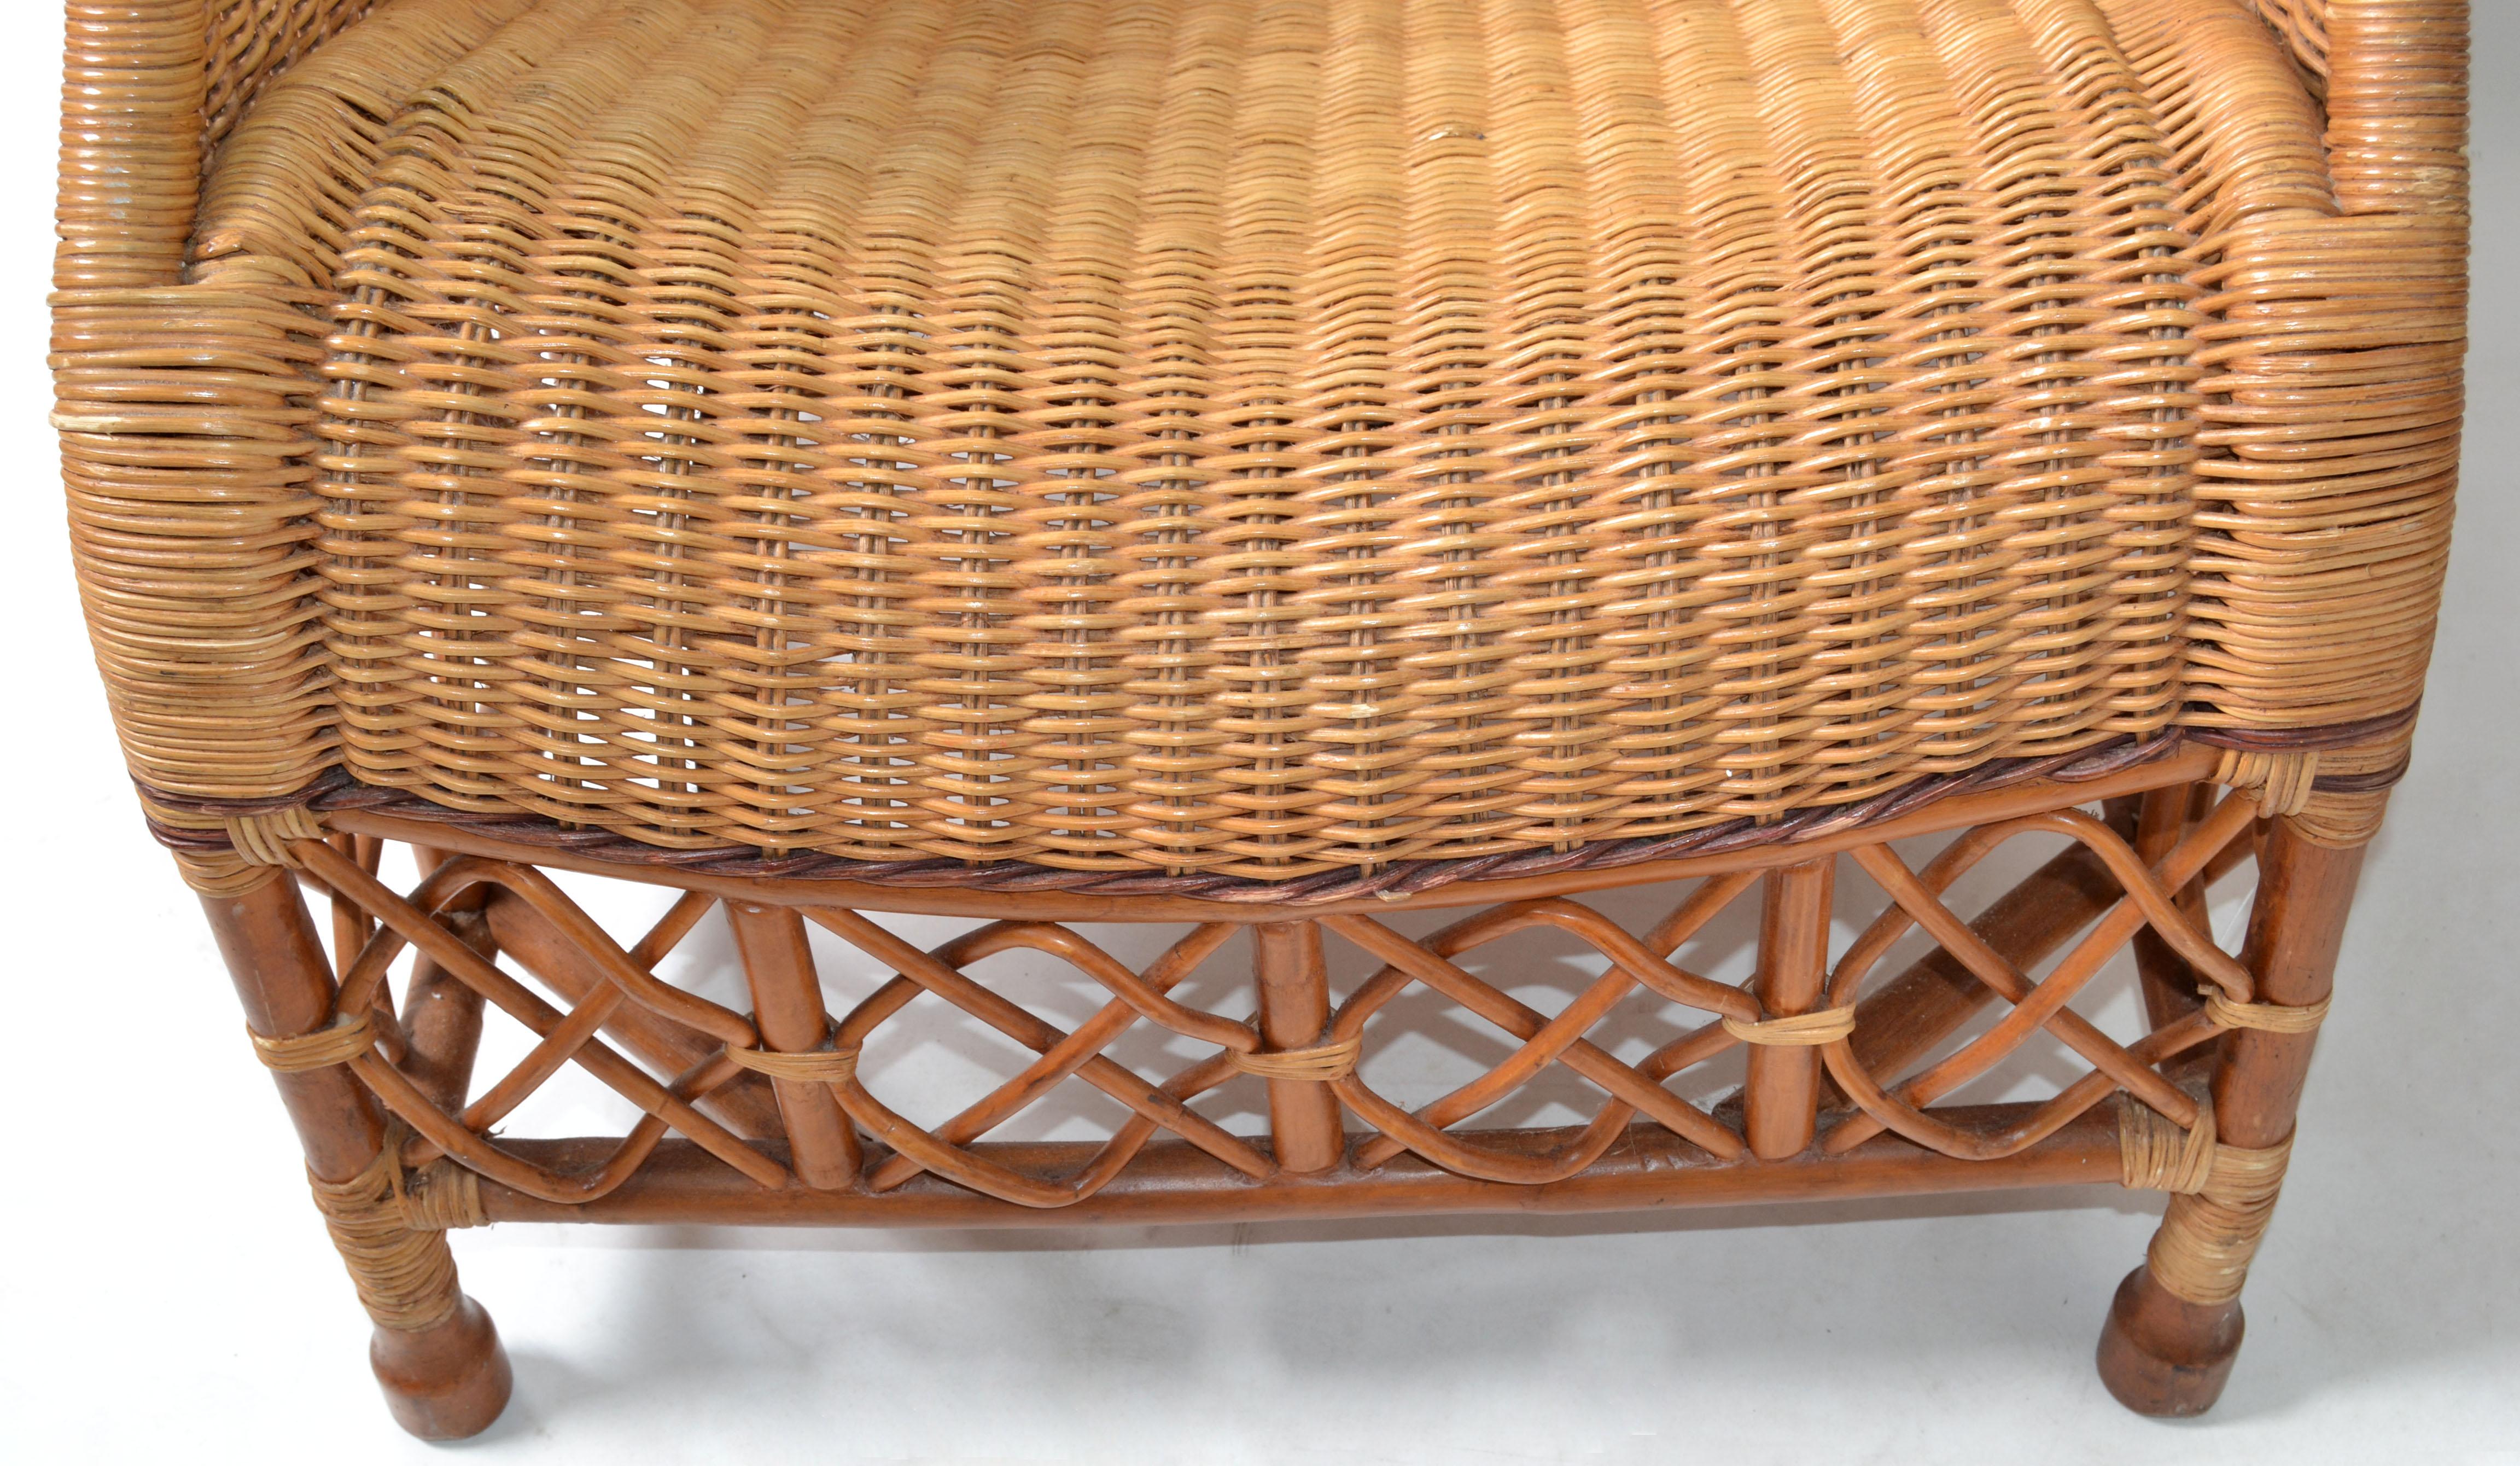 Bamboo, Cane & Wicker Lounge Chair Handwoven Bohemian 1960 Mid-Century Modern For Sale 1